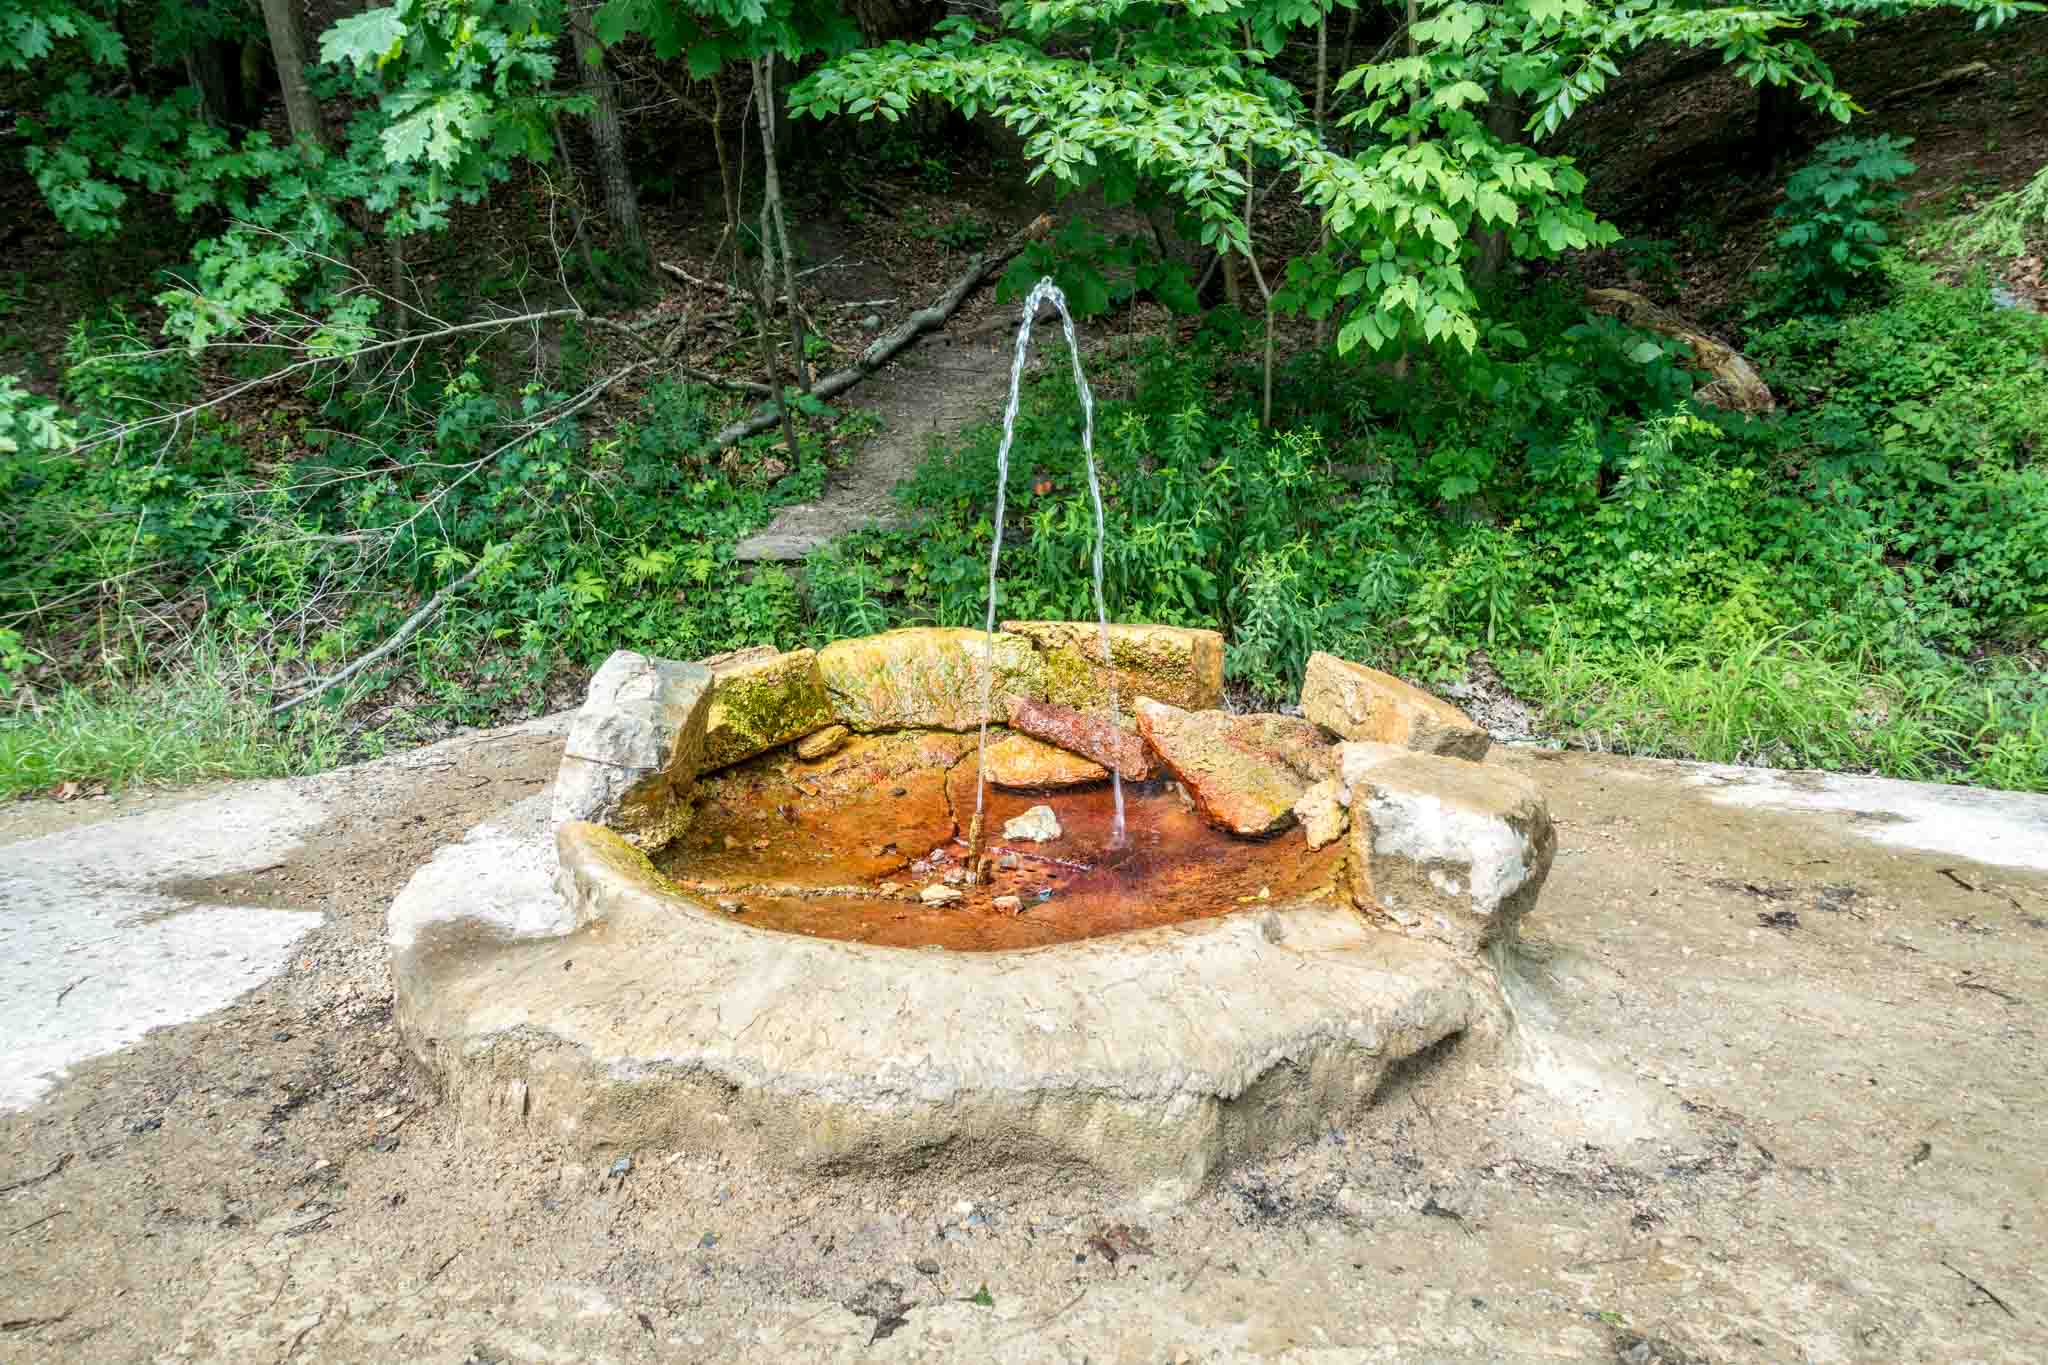 Polaris spring, a natural mineral spring shooting up from the ground